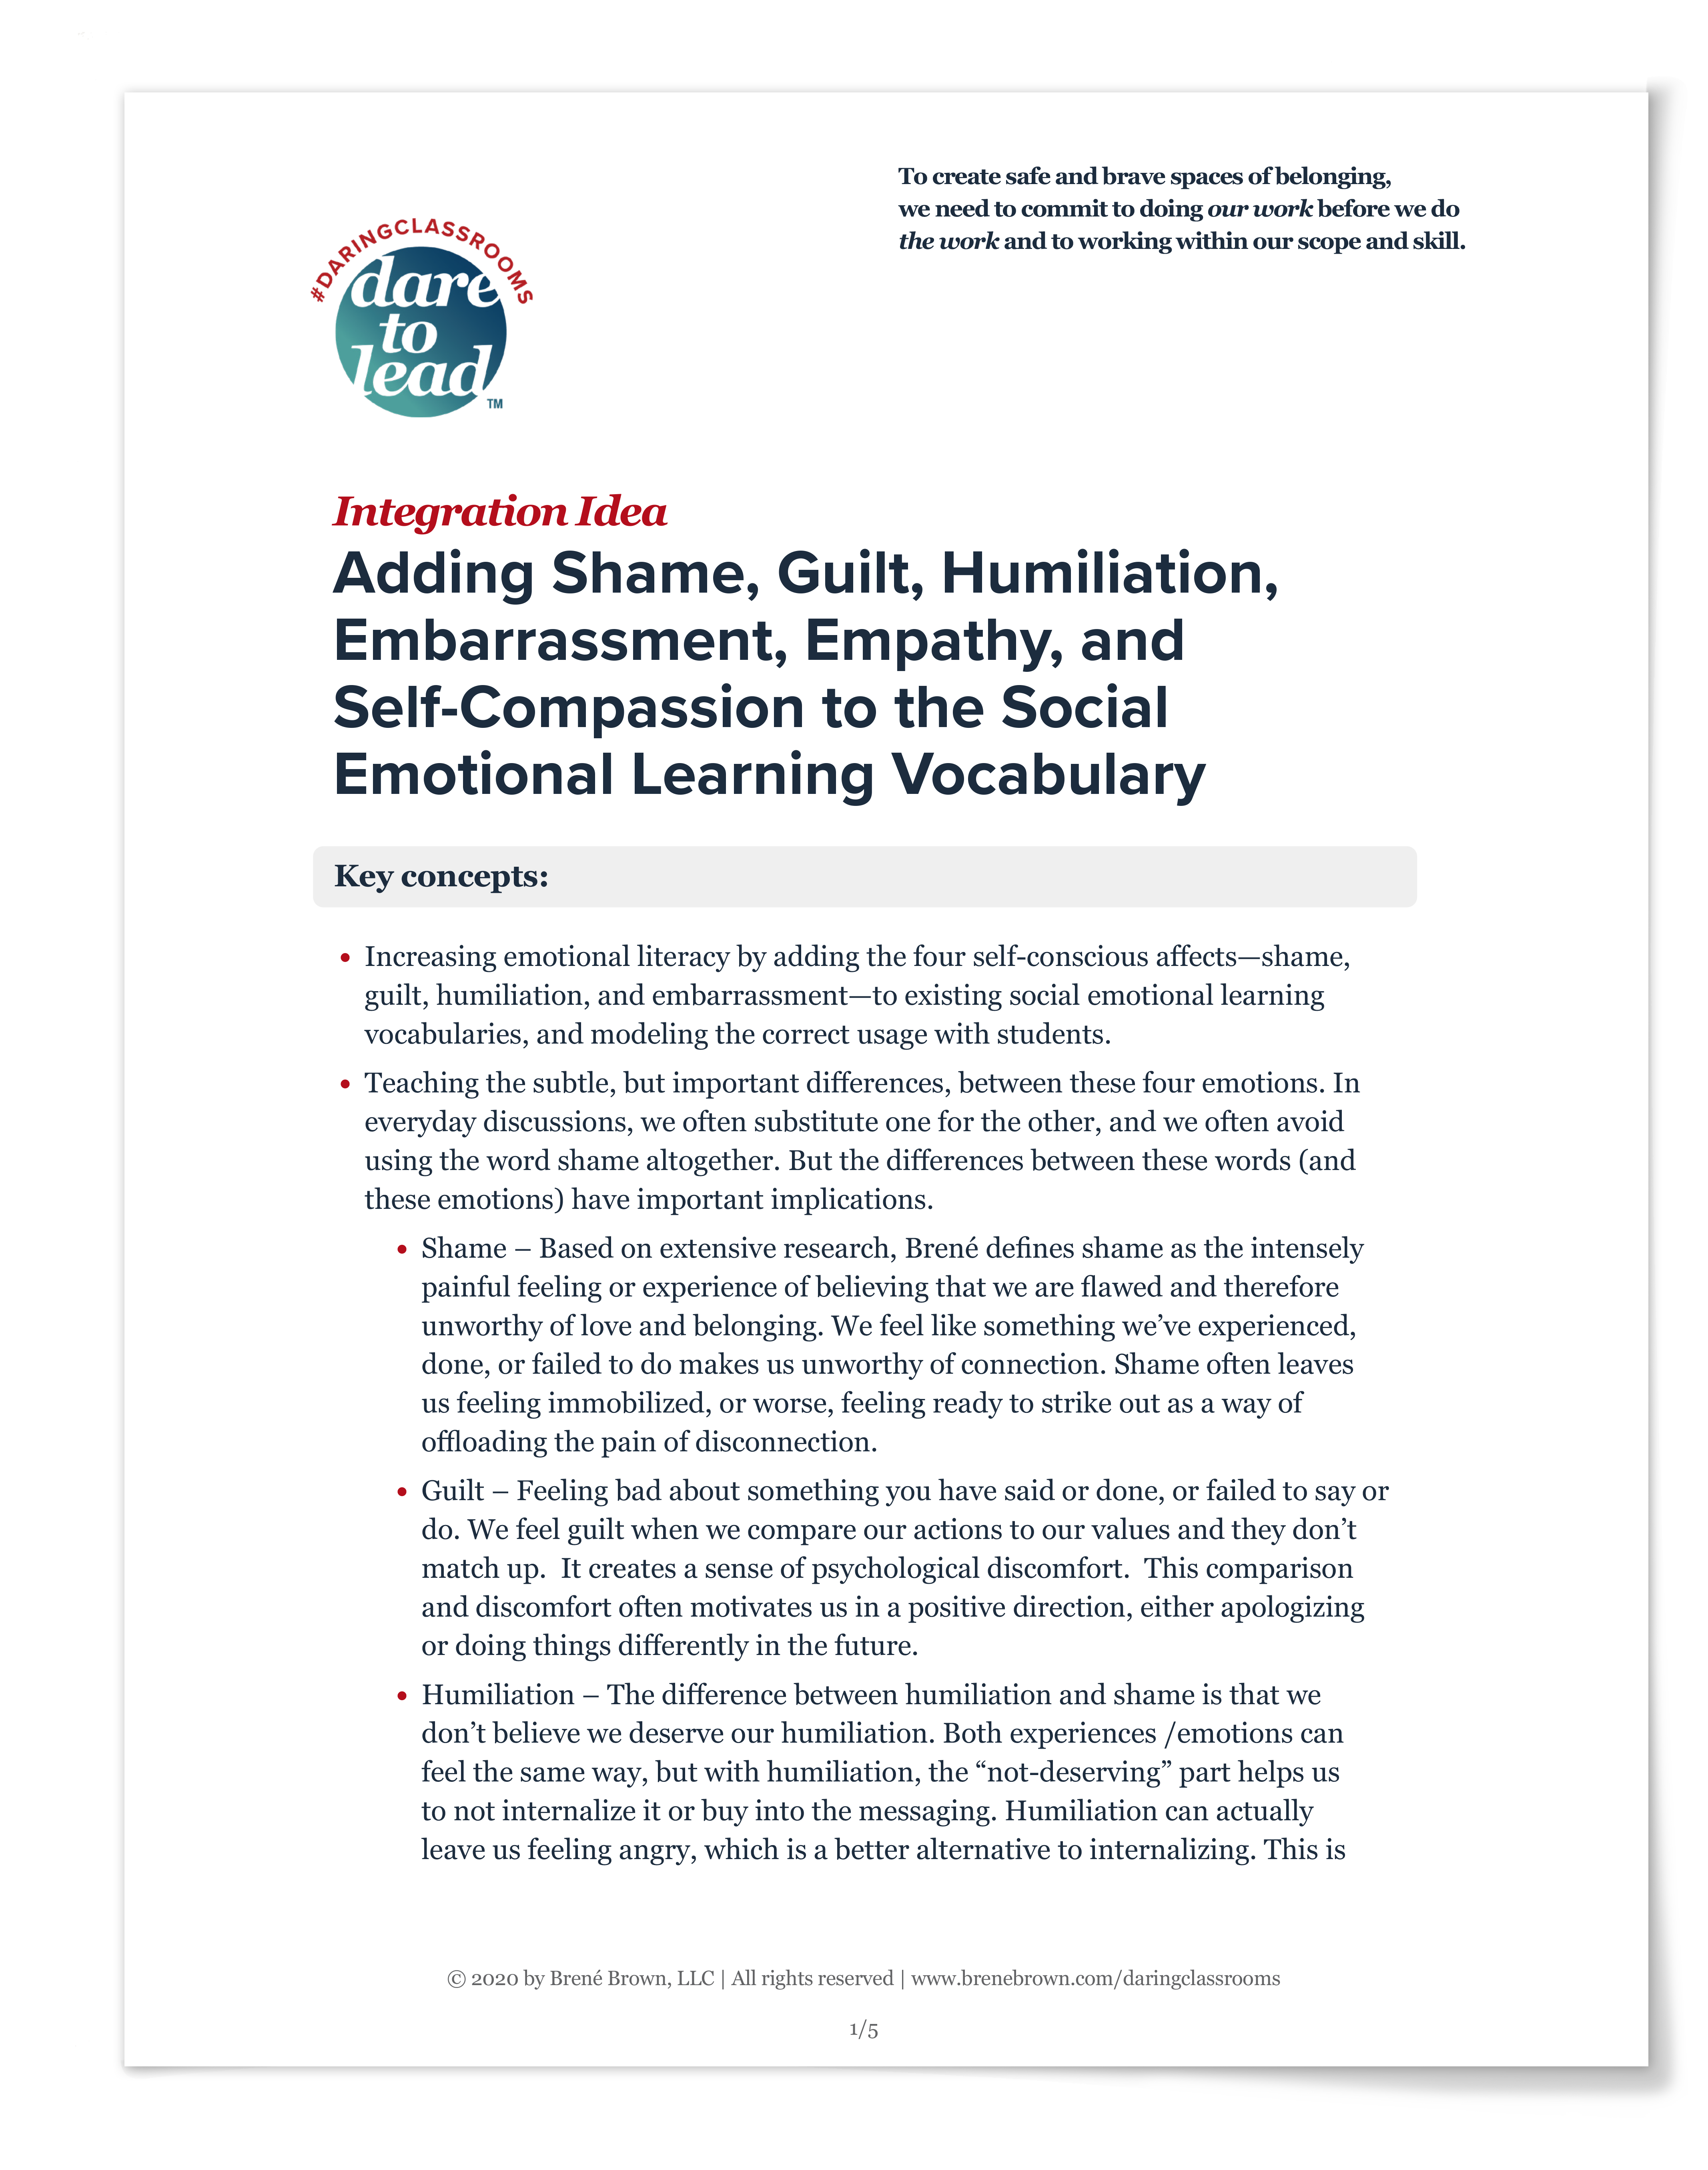 Adding Shame, Guilt, Humiliation, Embarrassment, Empathy, and Self-Compassion to the Social Emotional Learning Vocabulary for Daring Classrooms